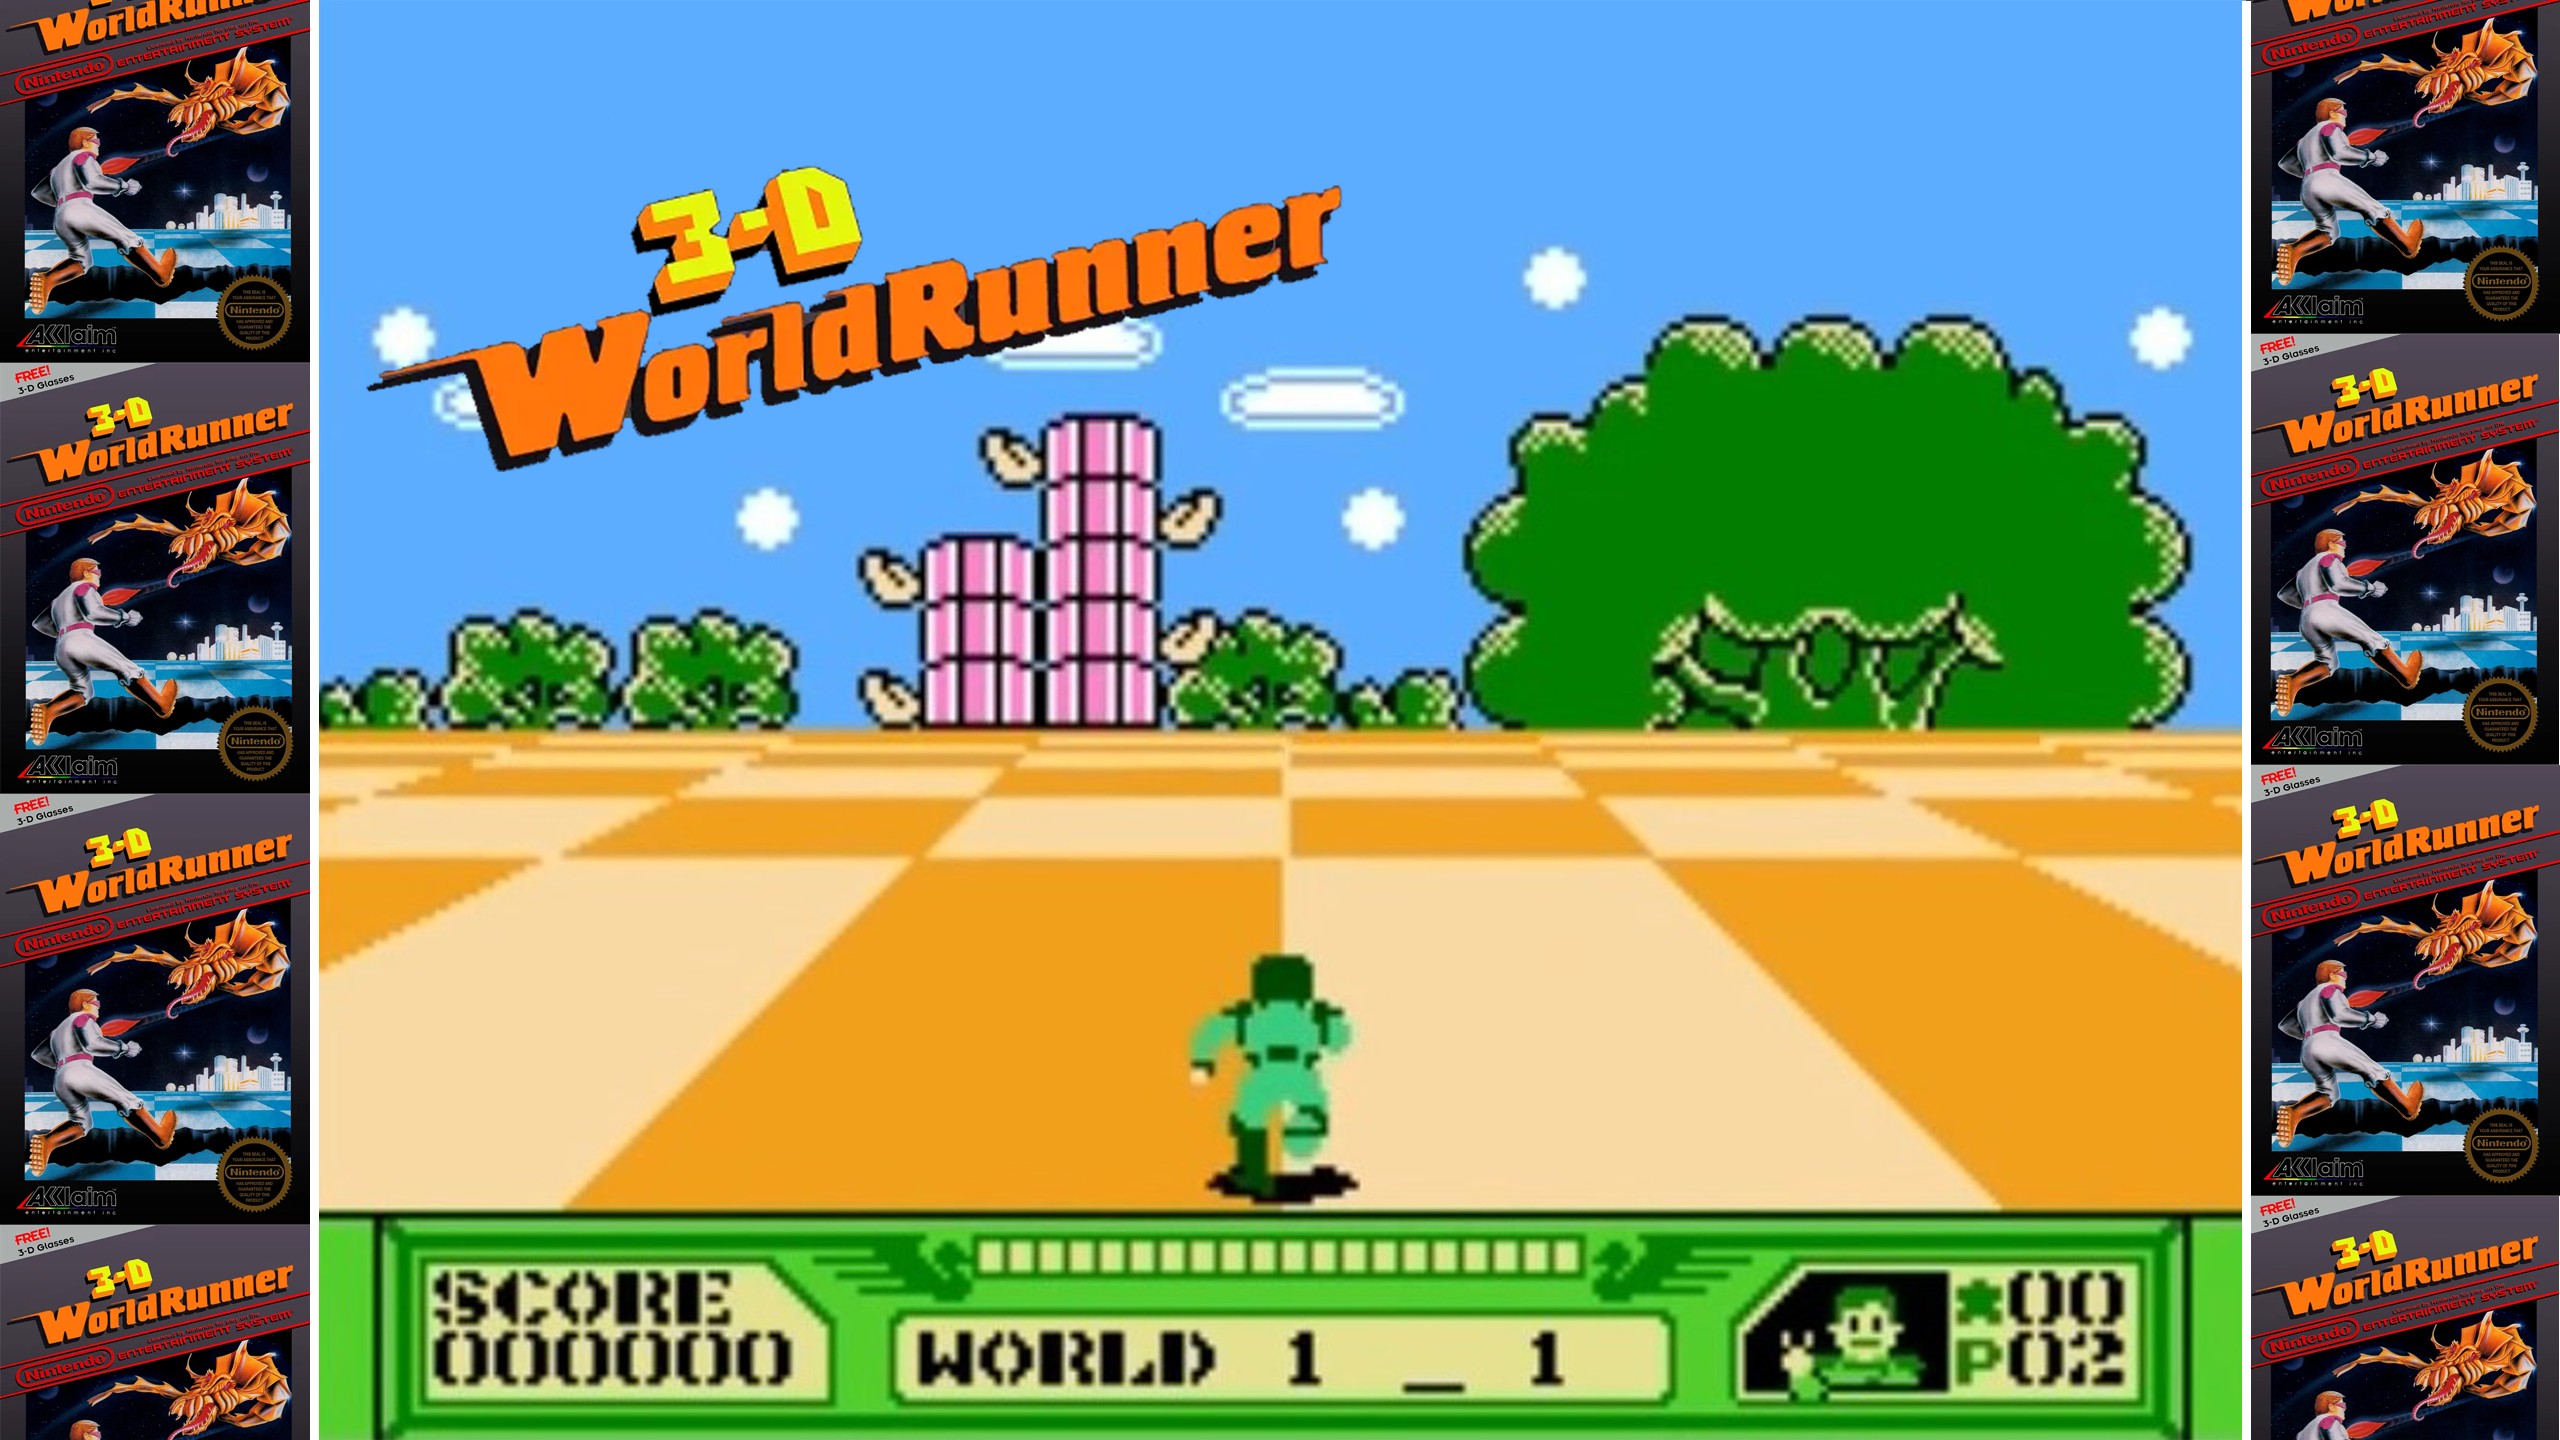 “3-D Worldrunner”: A Dive into a Classic Space Adventure